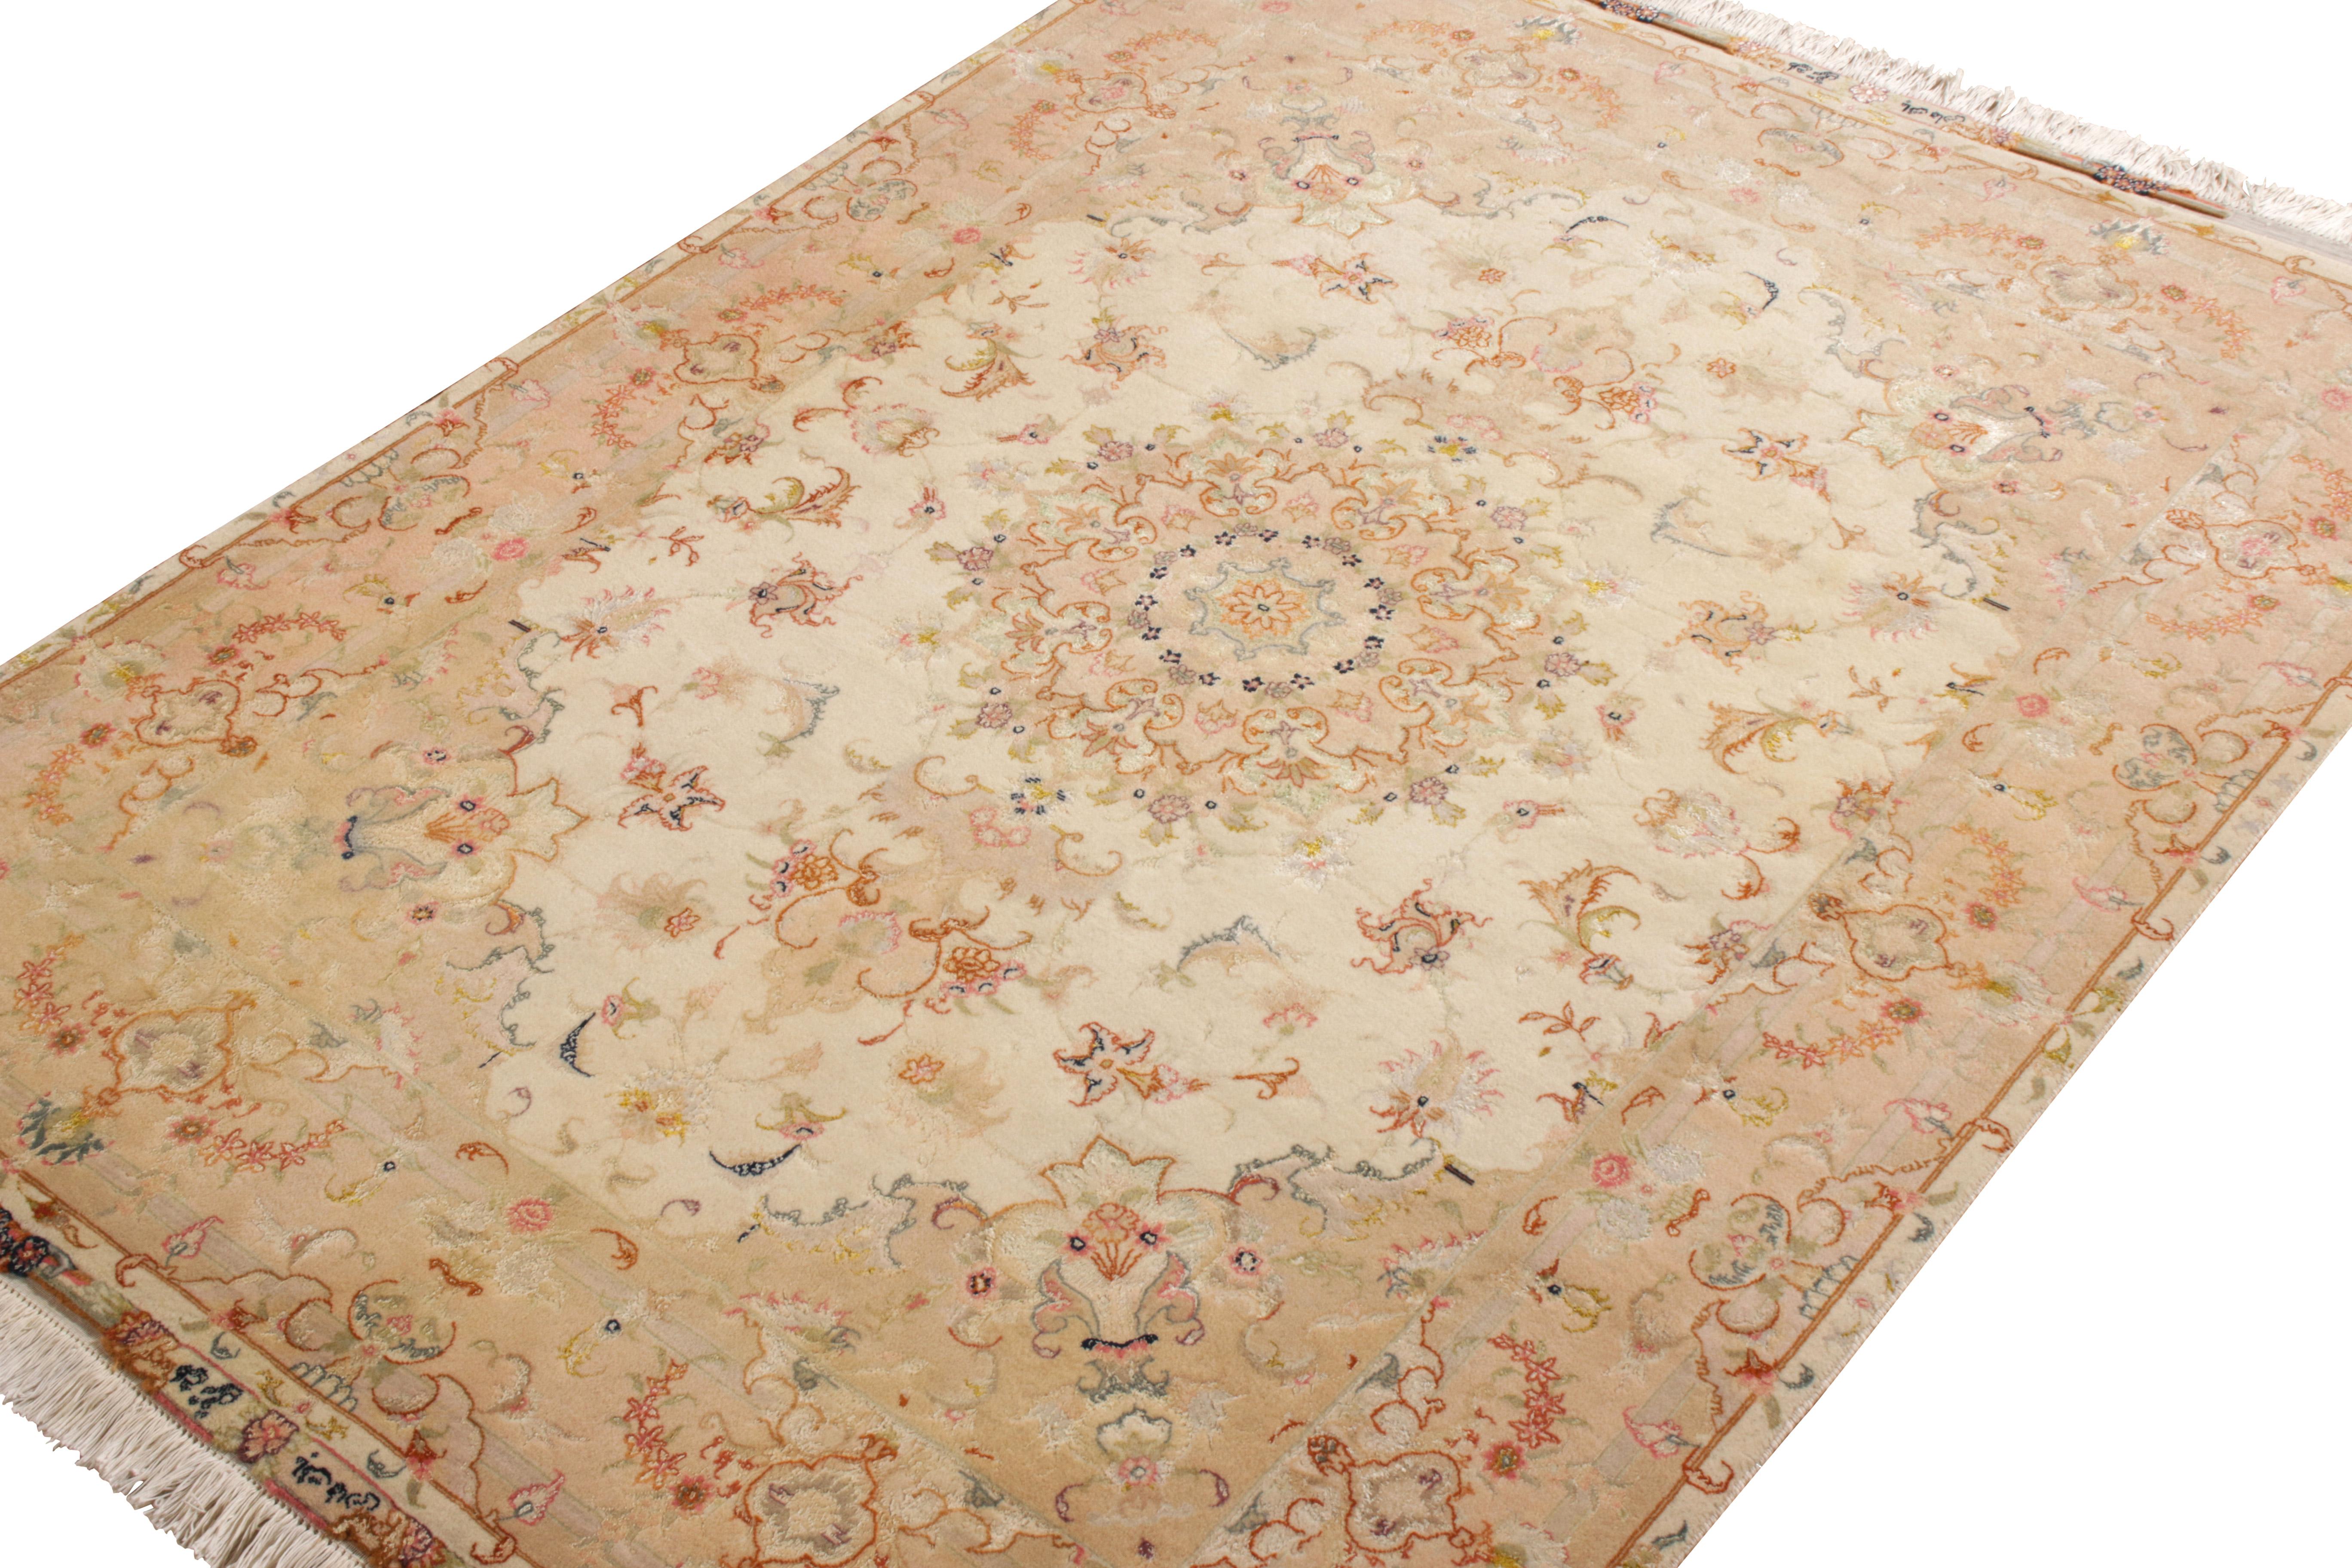 Hand-Knotted Vintage Persian Rug, Peach Medallion Floral Pattern by Rug & Kilim In Good Condition For Sale In Long Island City, NY